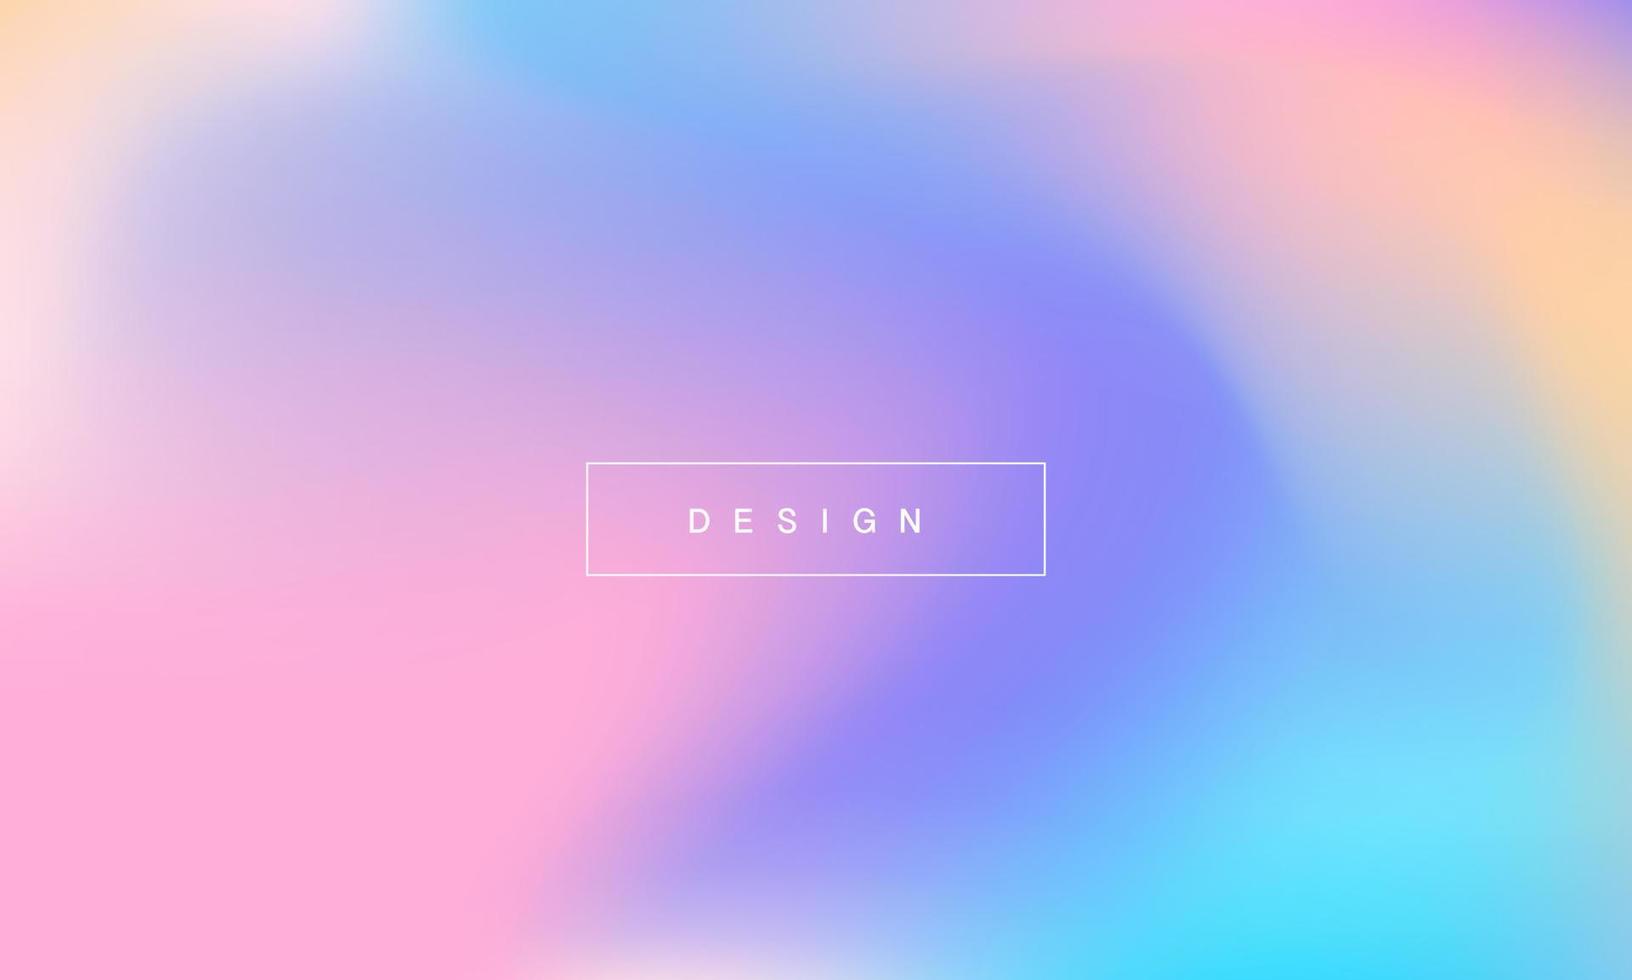 Pastel abstract gradient backgrounds. soft tender pink, blue, purple and orange gradients for app, web design, webpages, banners, greeting cards. vector illustration design